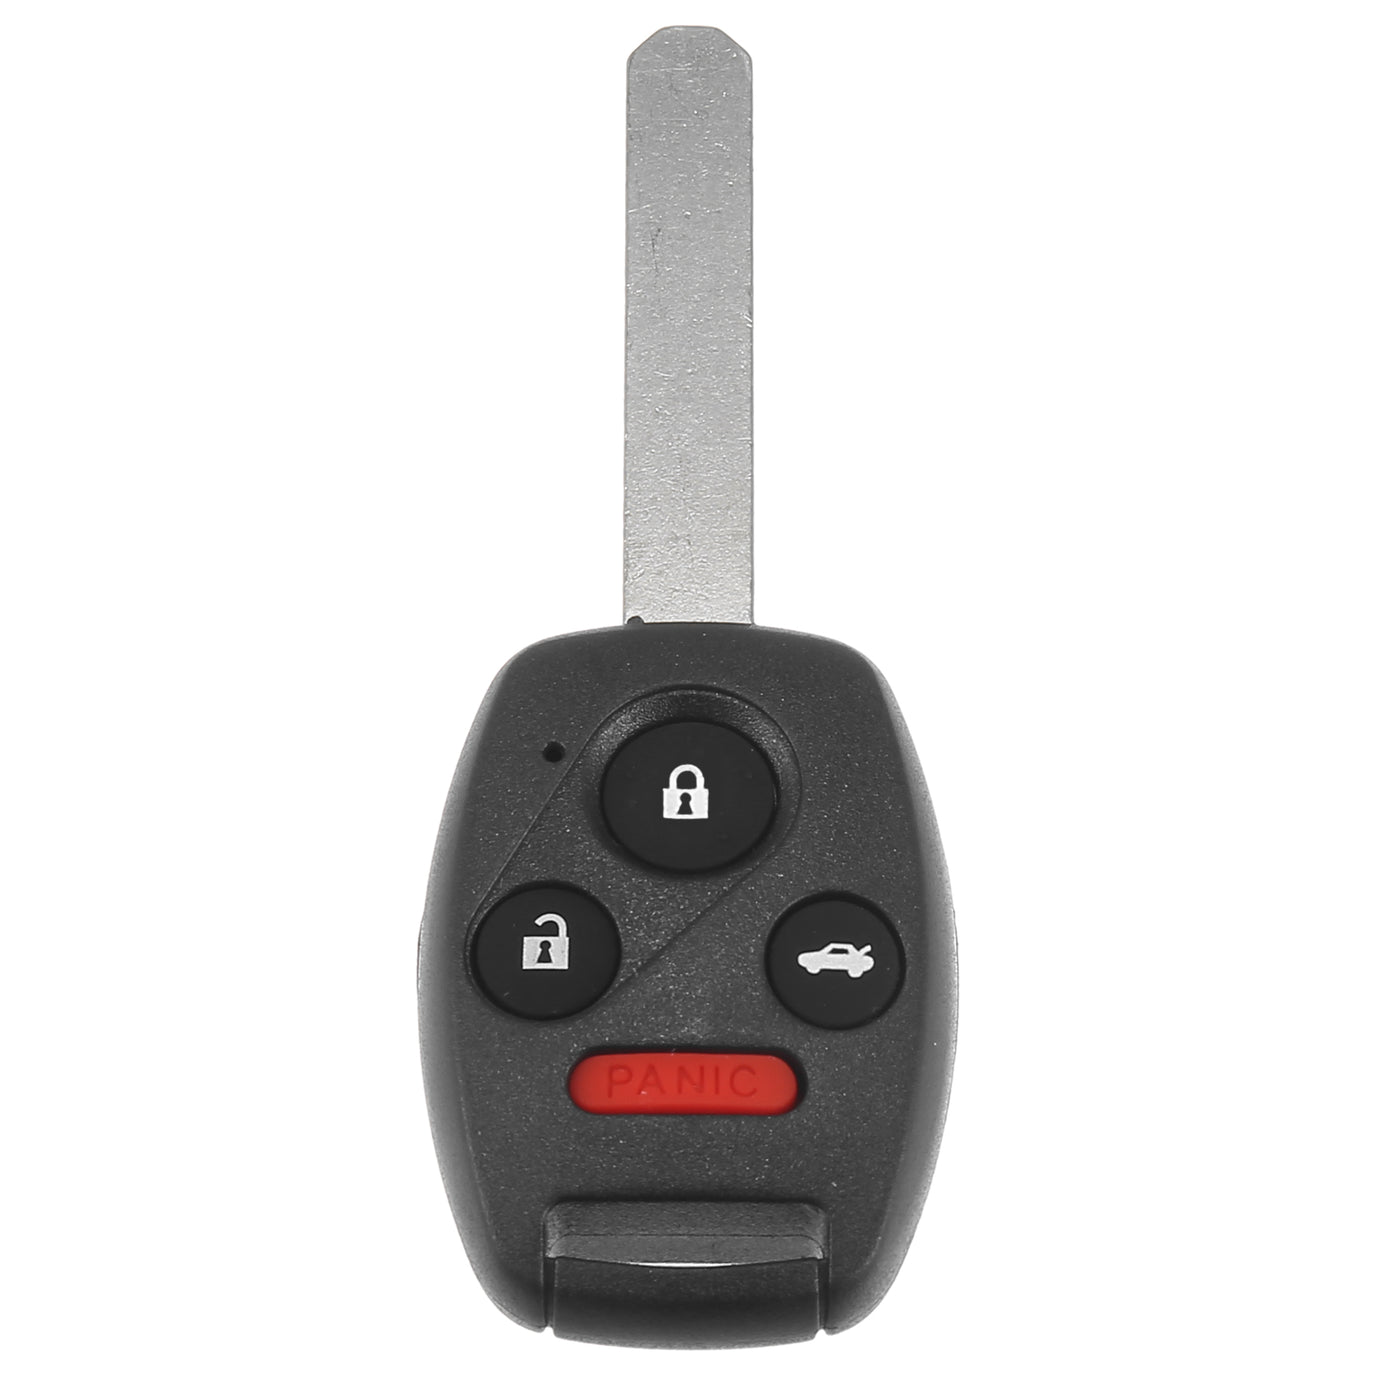 X AUTOHAUX 313.8MHz KR55WK49308 Replacement Smart Proximity Keyless Entry Remote Key Fob for Honda Accord Sedan 4 Door 2008-2012 4 Buttons with Door Key 46 Chip